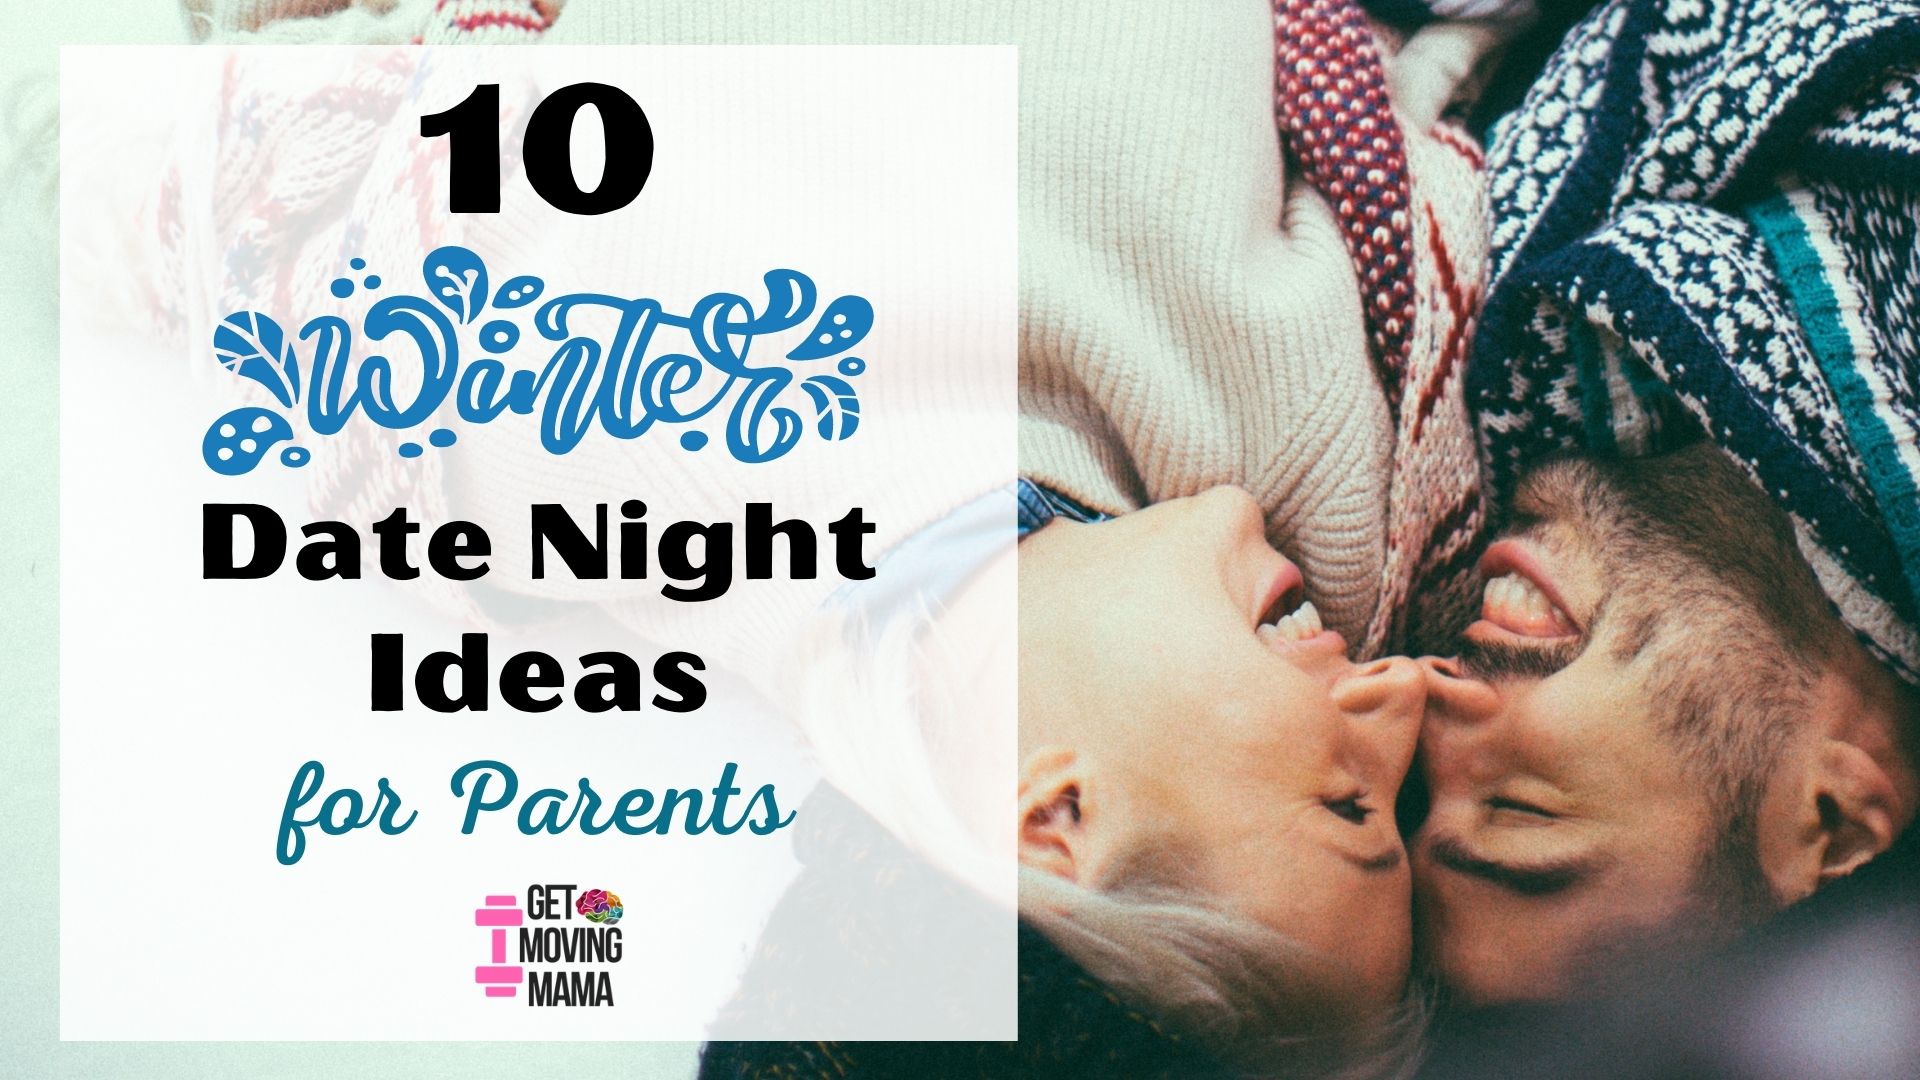 A picture of a couple snuggling with winter gear on with "10 winter date night ideas for parents" in text.